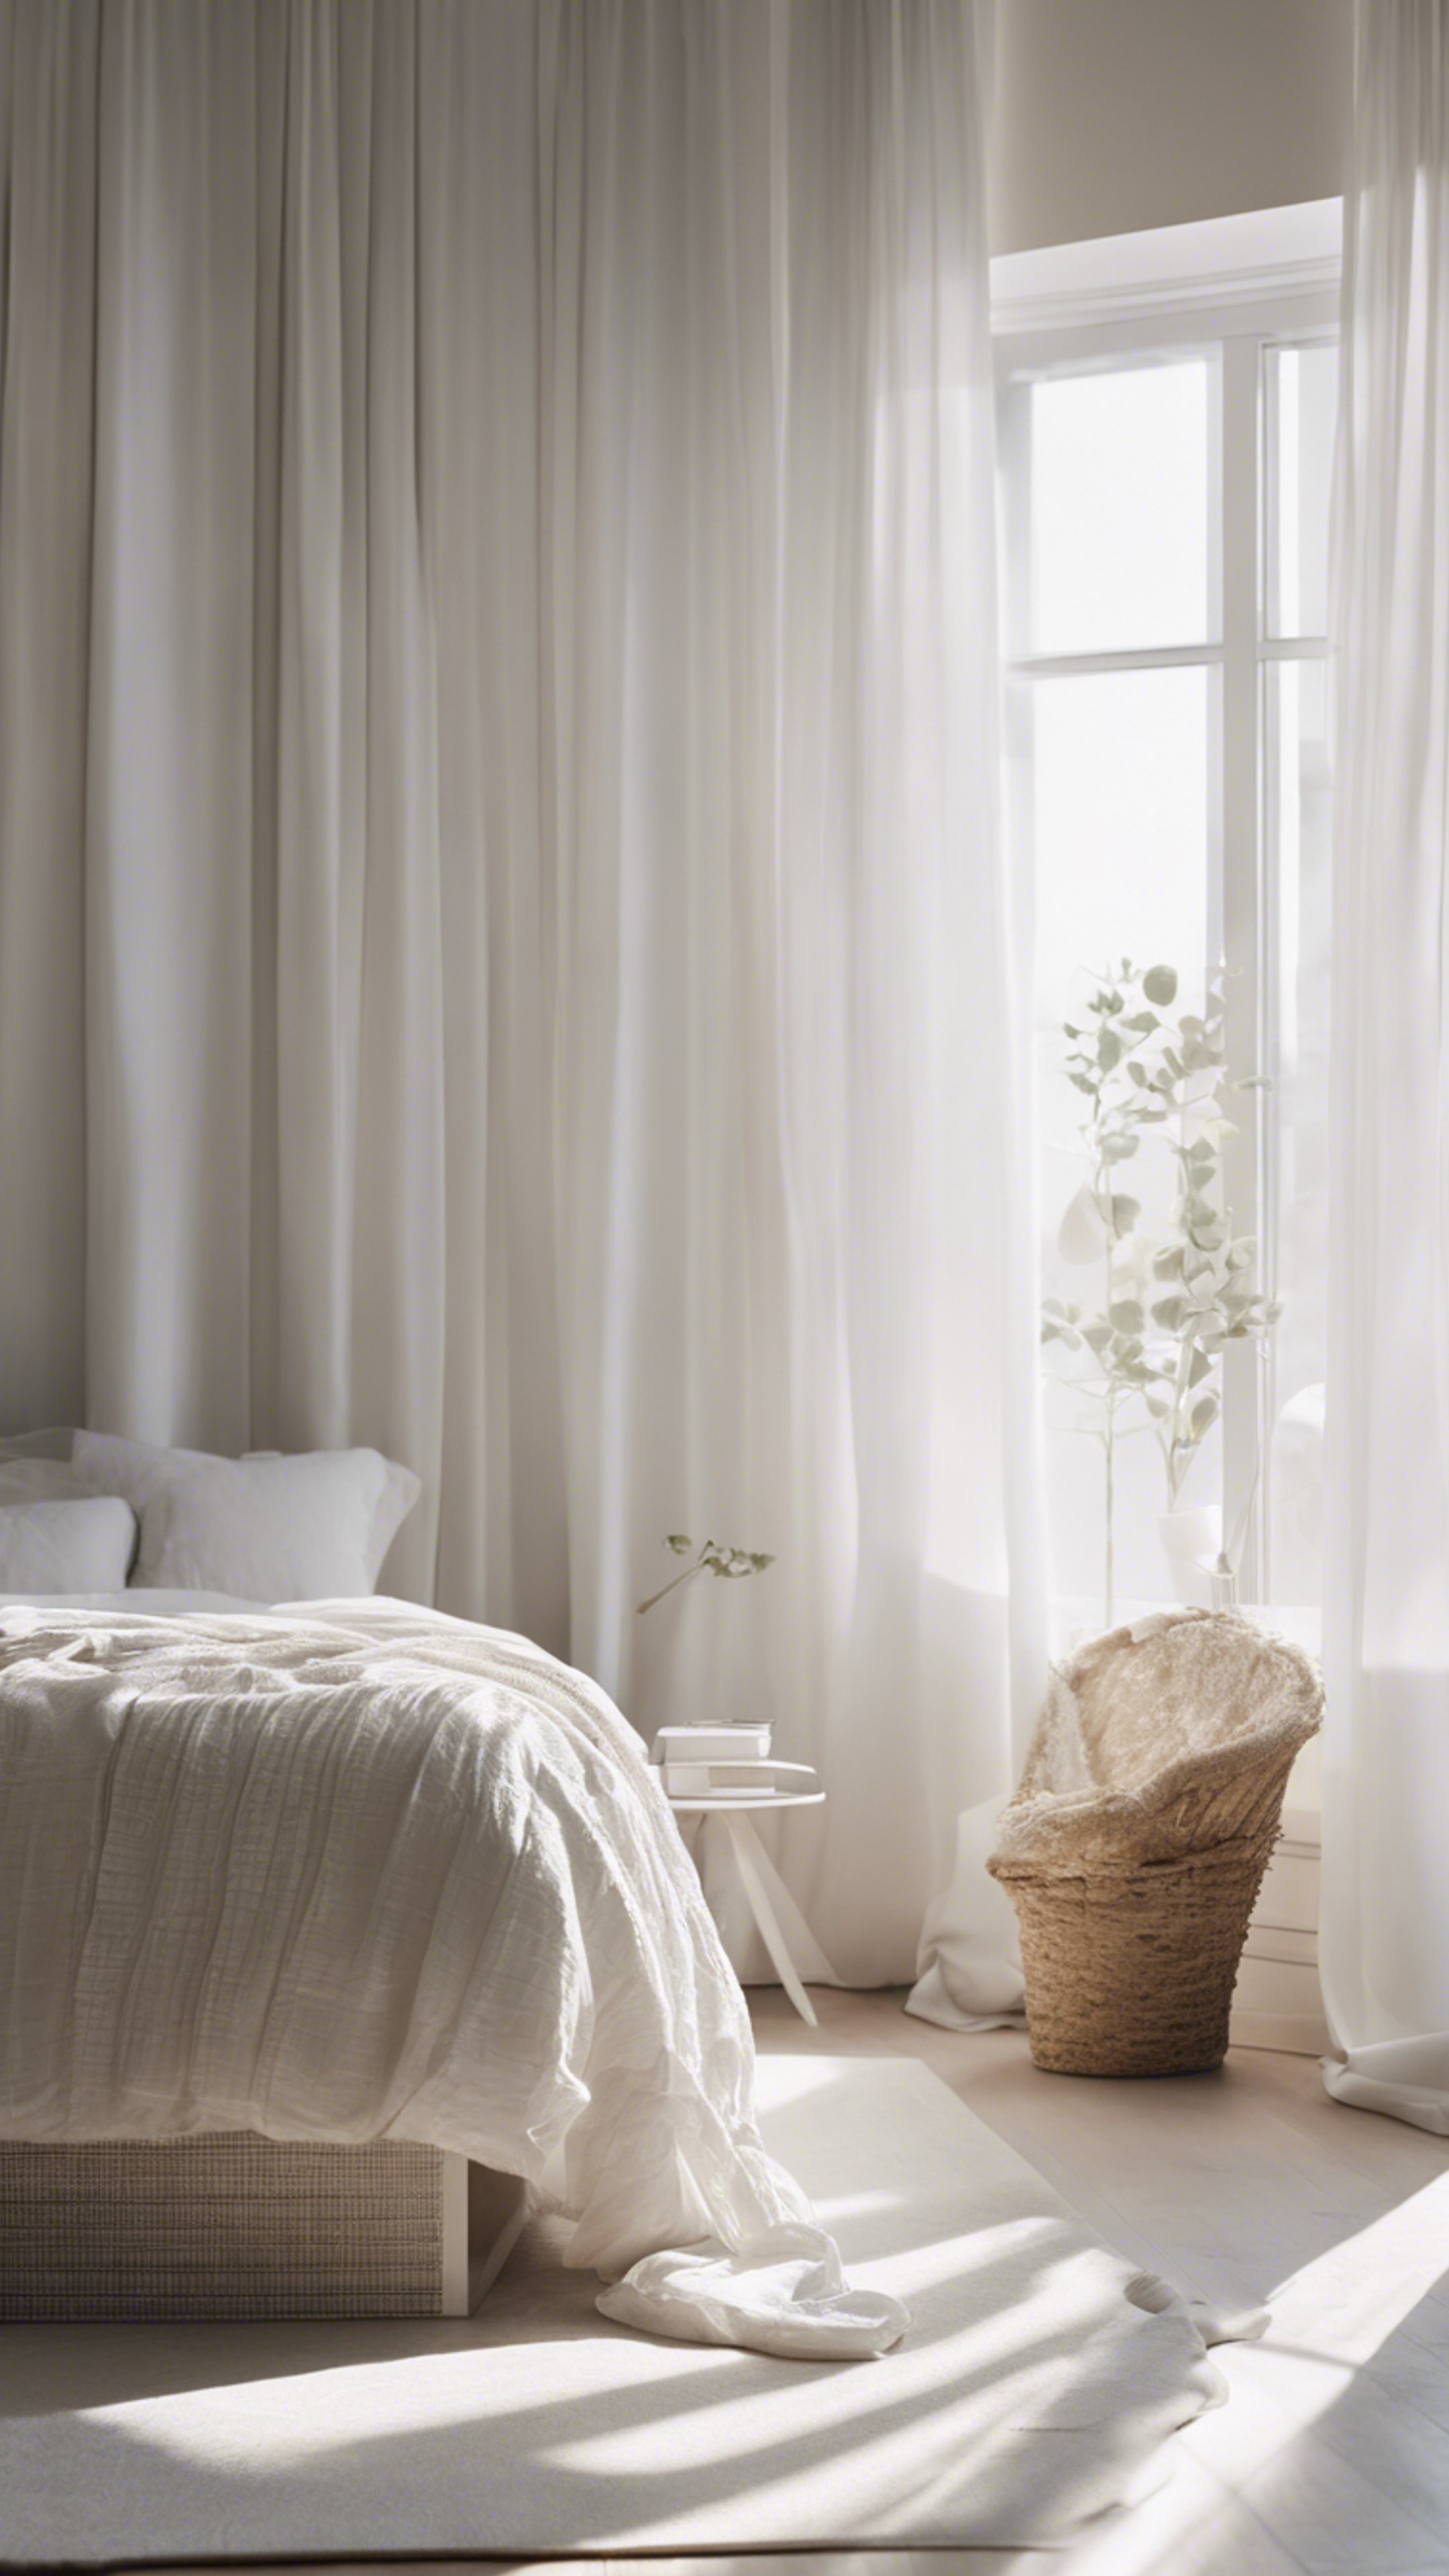 A serene white bedroom with a minimalist aesthetic, sunlight streaming through sheer curtains Wallpaper[e50a9fa27884450ea562]